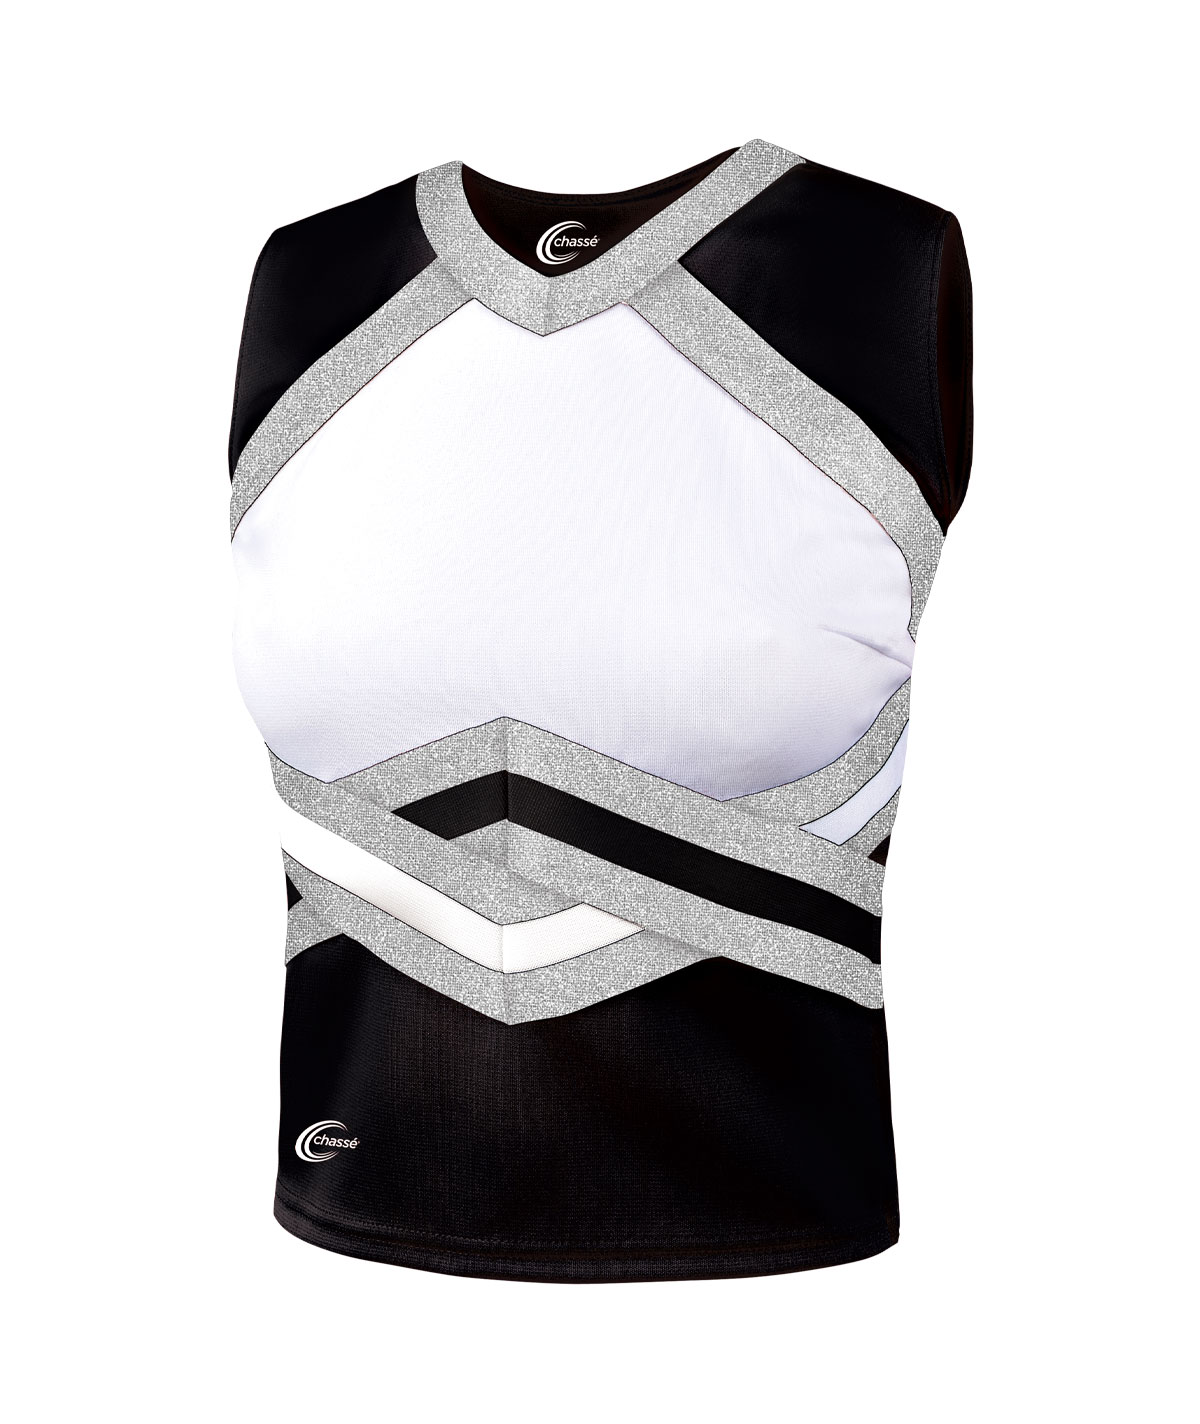 Chasse Contender Shell Top - Cheer Uniforms